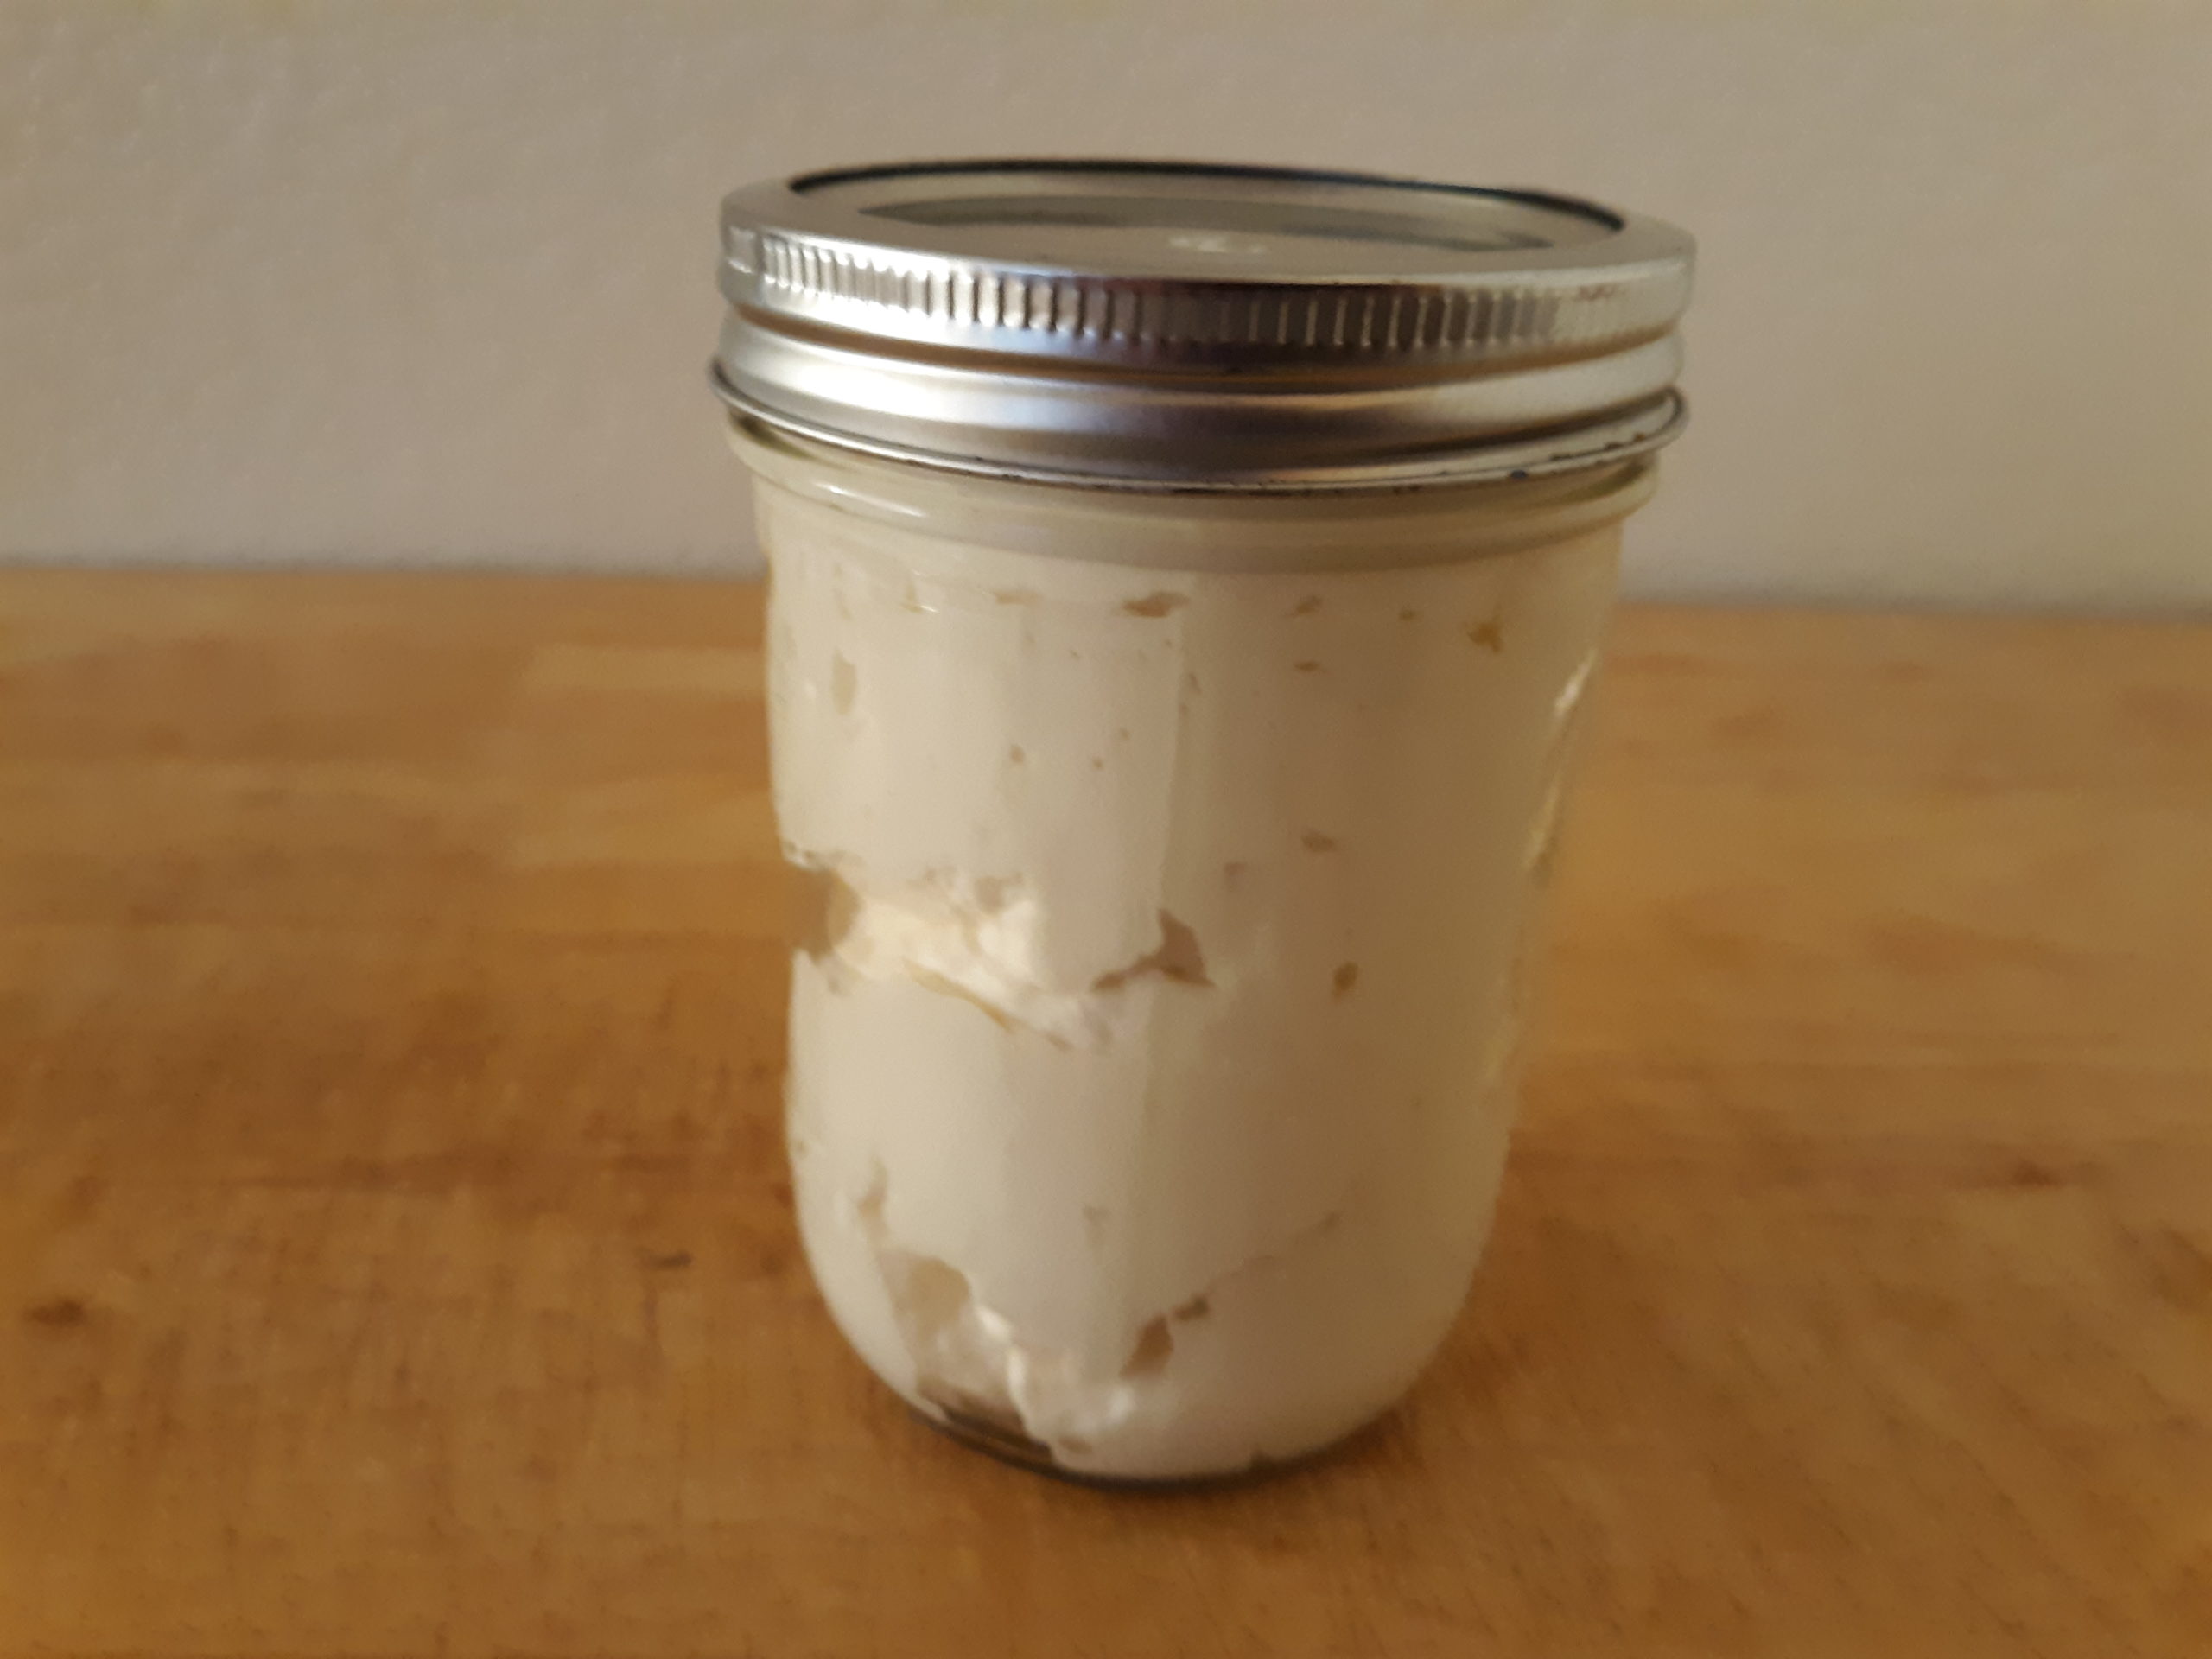 How To Make Keto Cool Whip Substitute